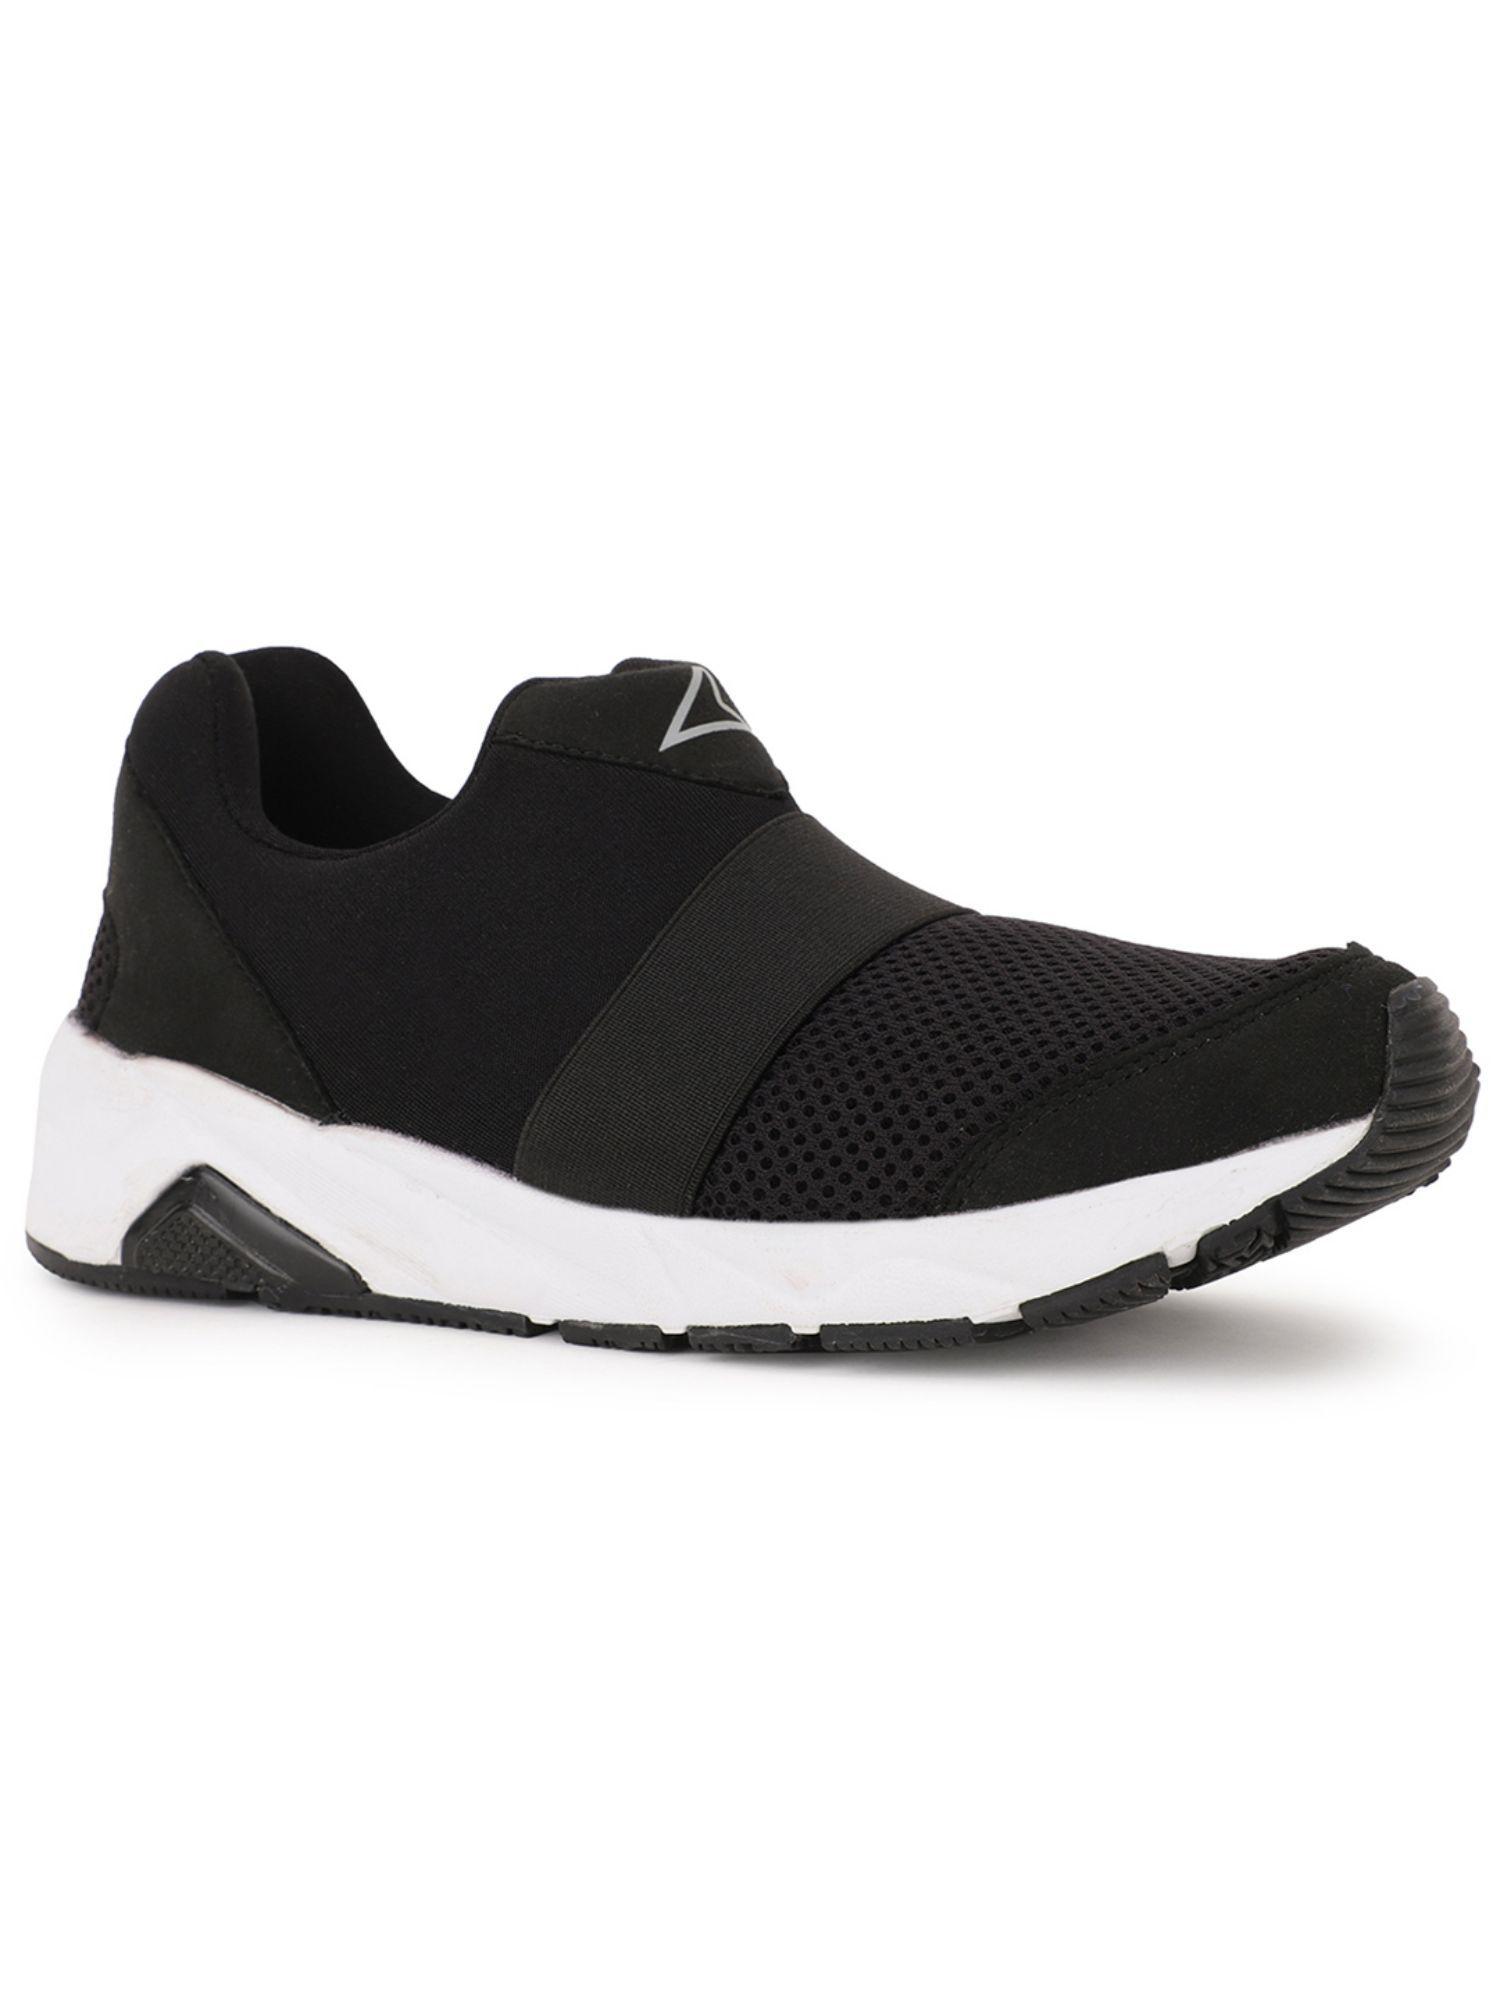 textured black mesh casual shoes